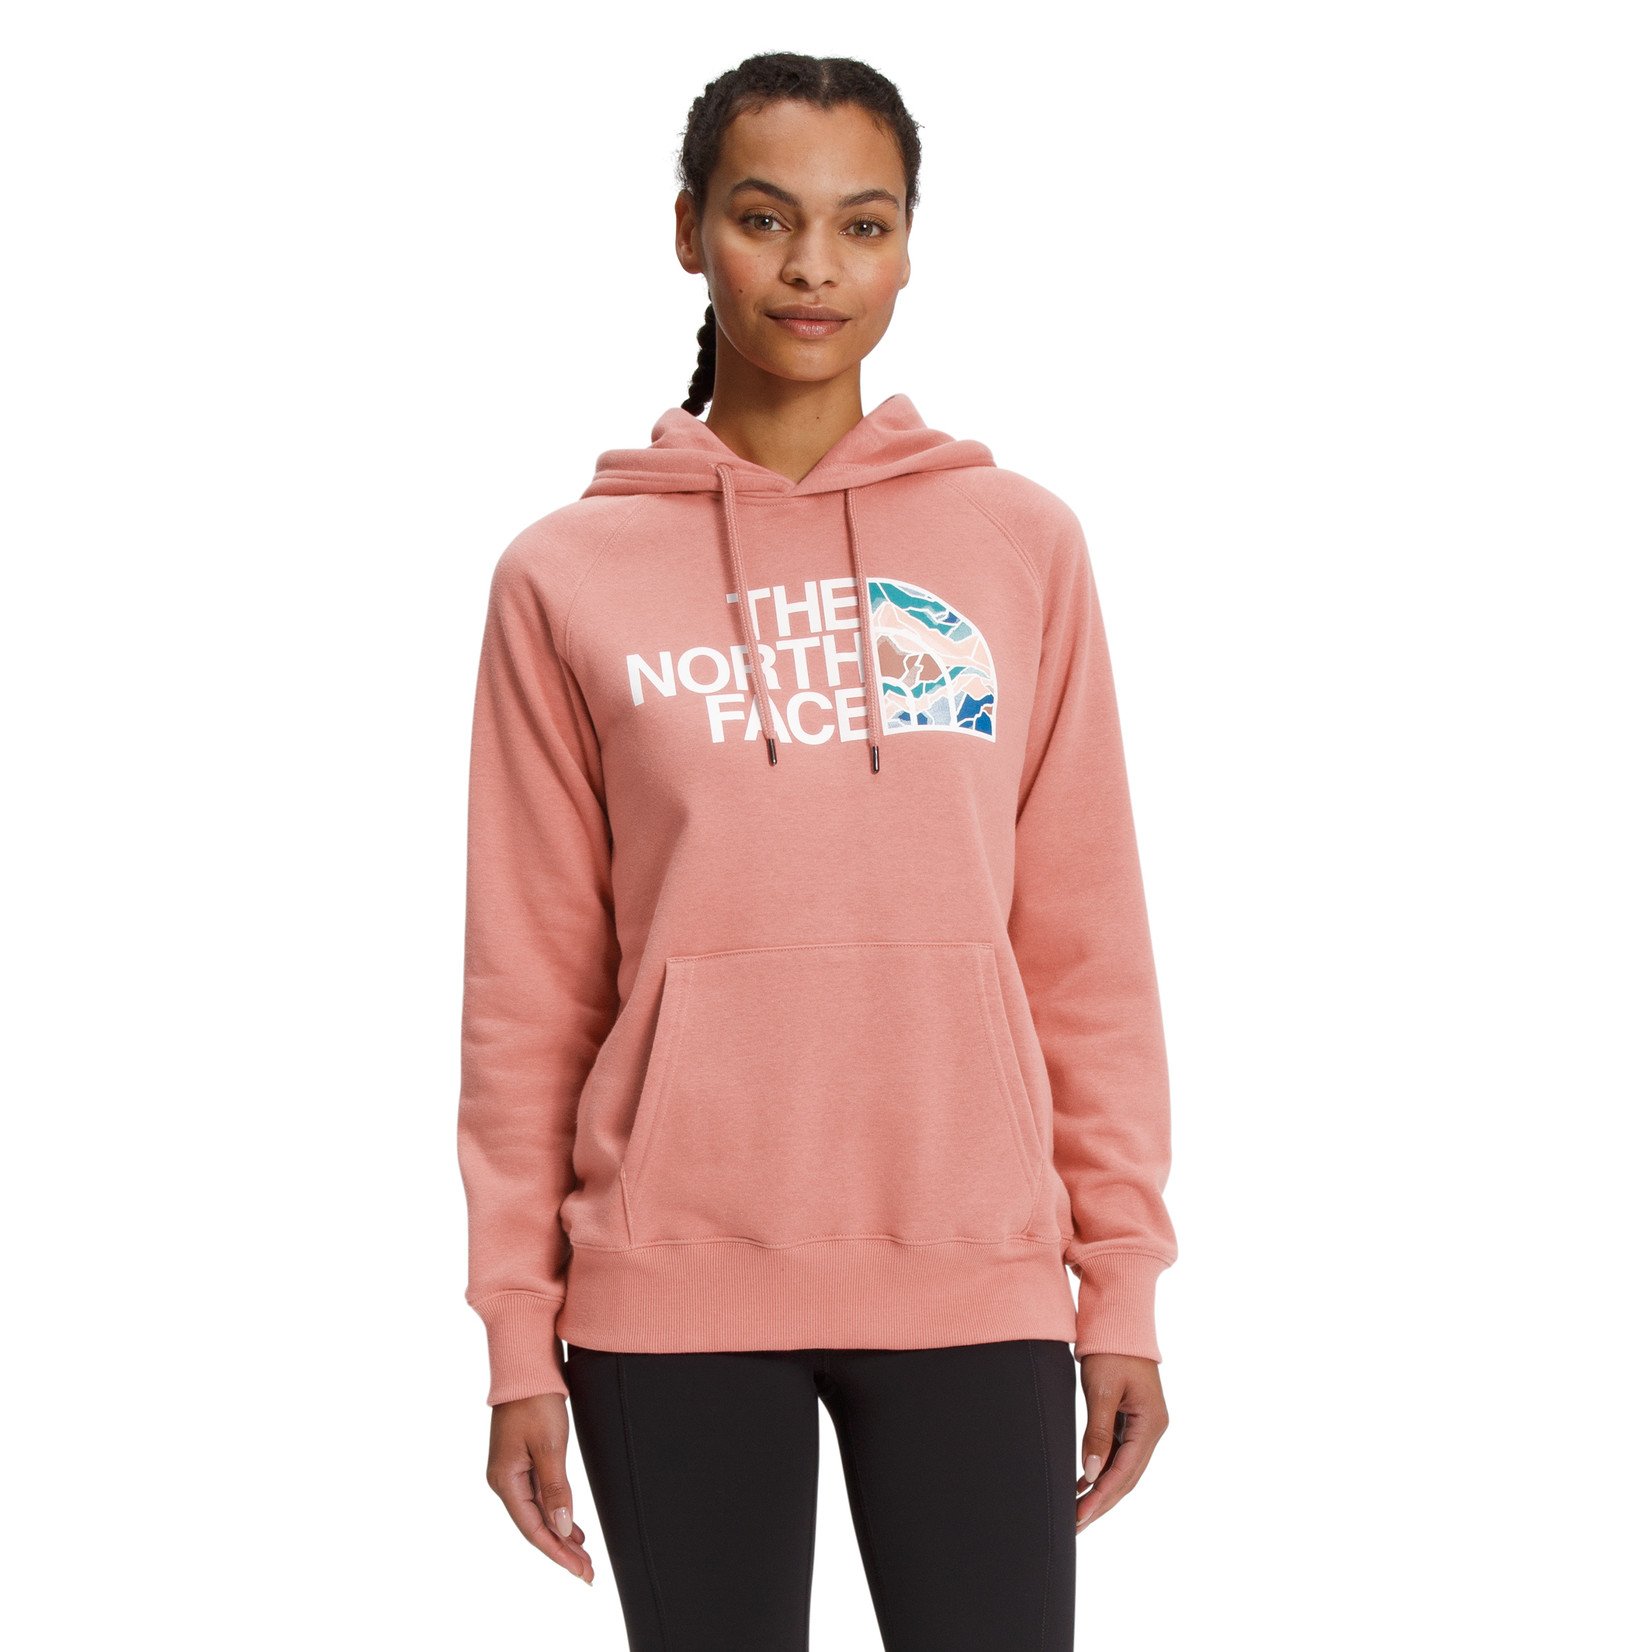 The North Face The North Face Women’s Half Dome Pullover Hoodie